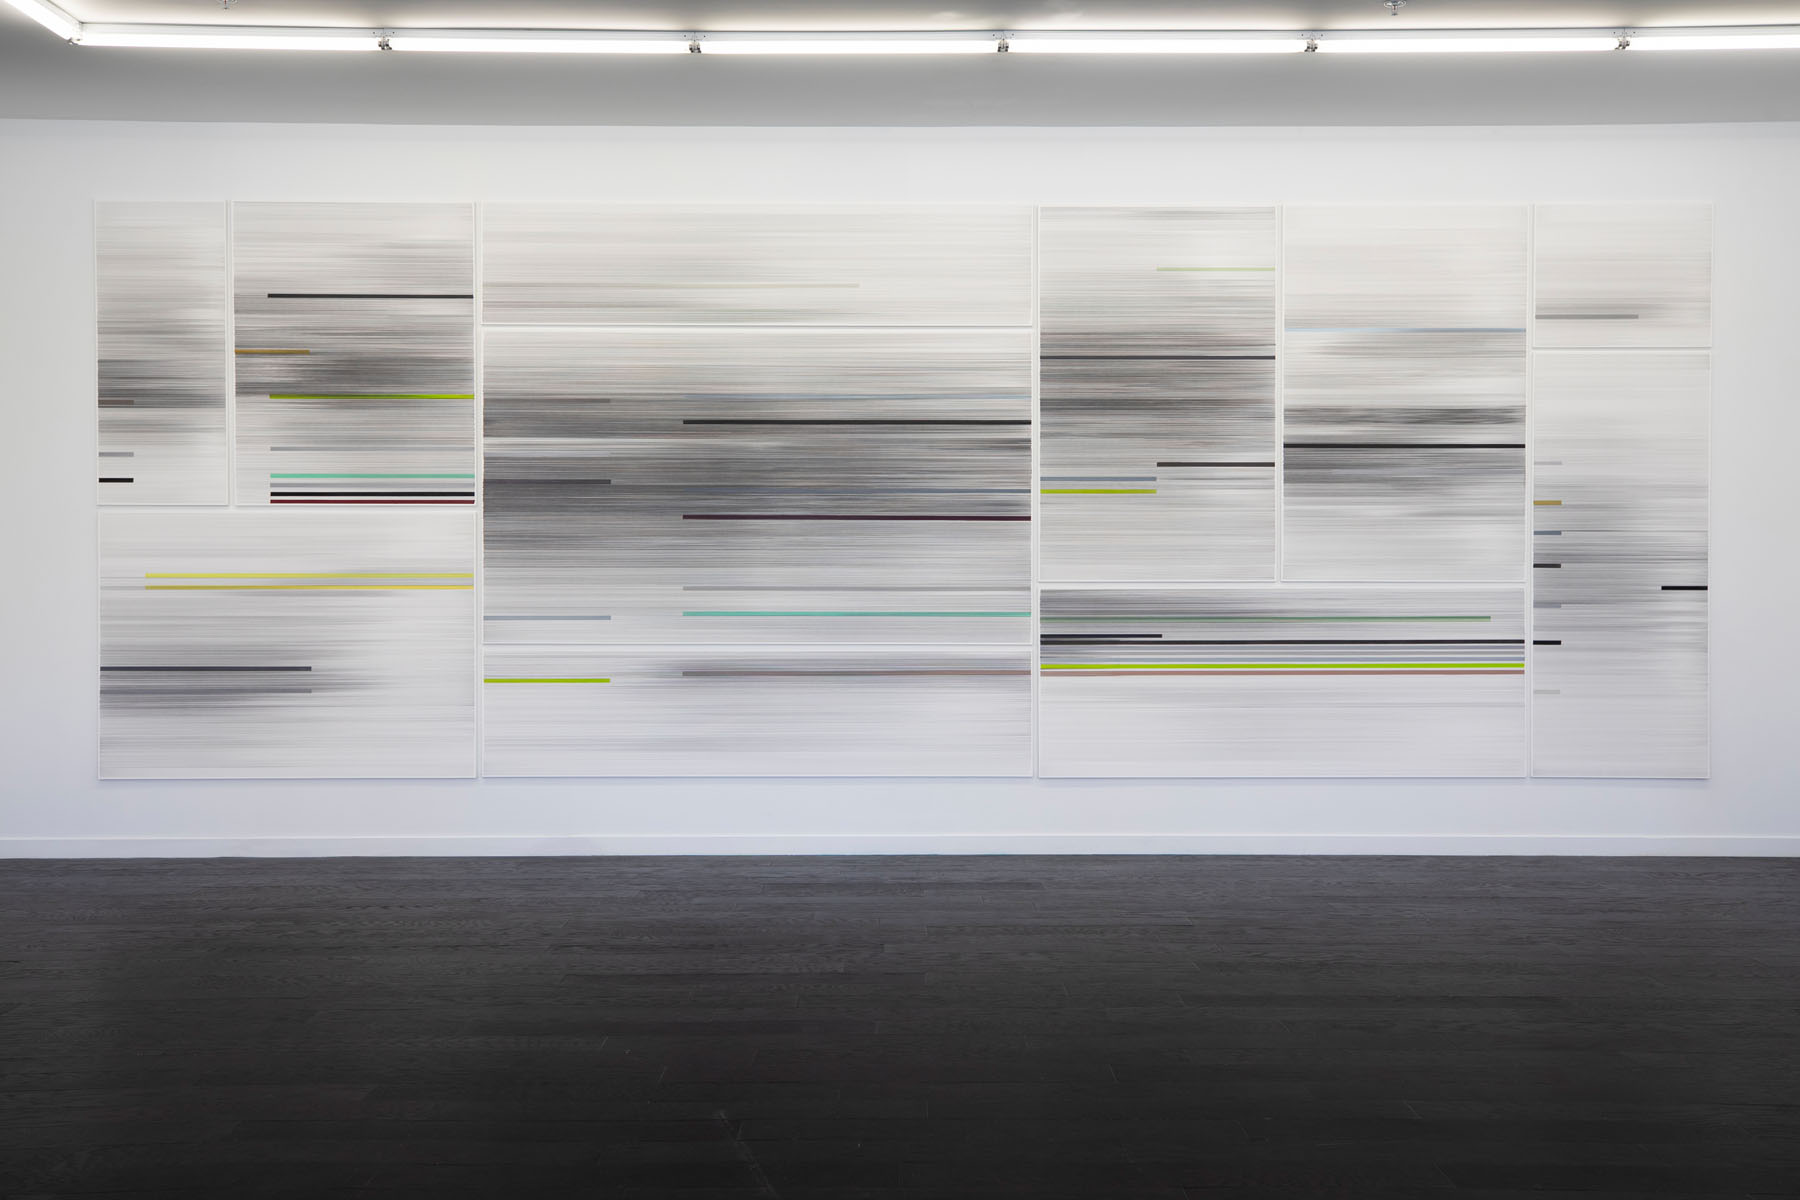    I begin with the river   2019 graphite and colored pencil on mat board 9 x 25 feet (11 panels) photography by Pete Mauney 